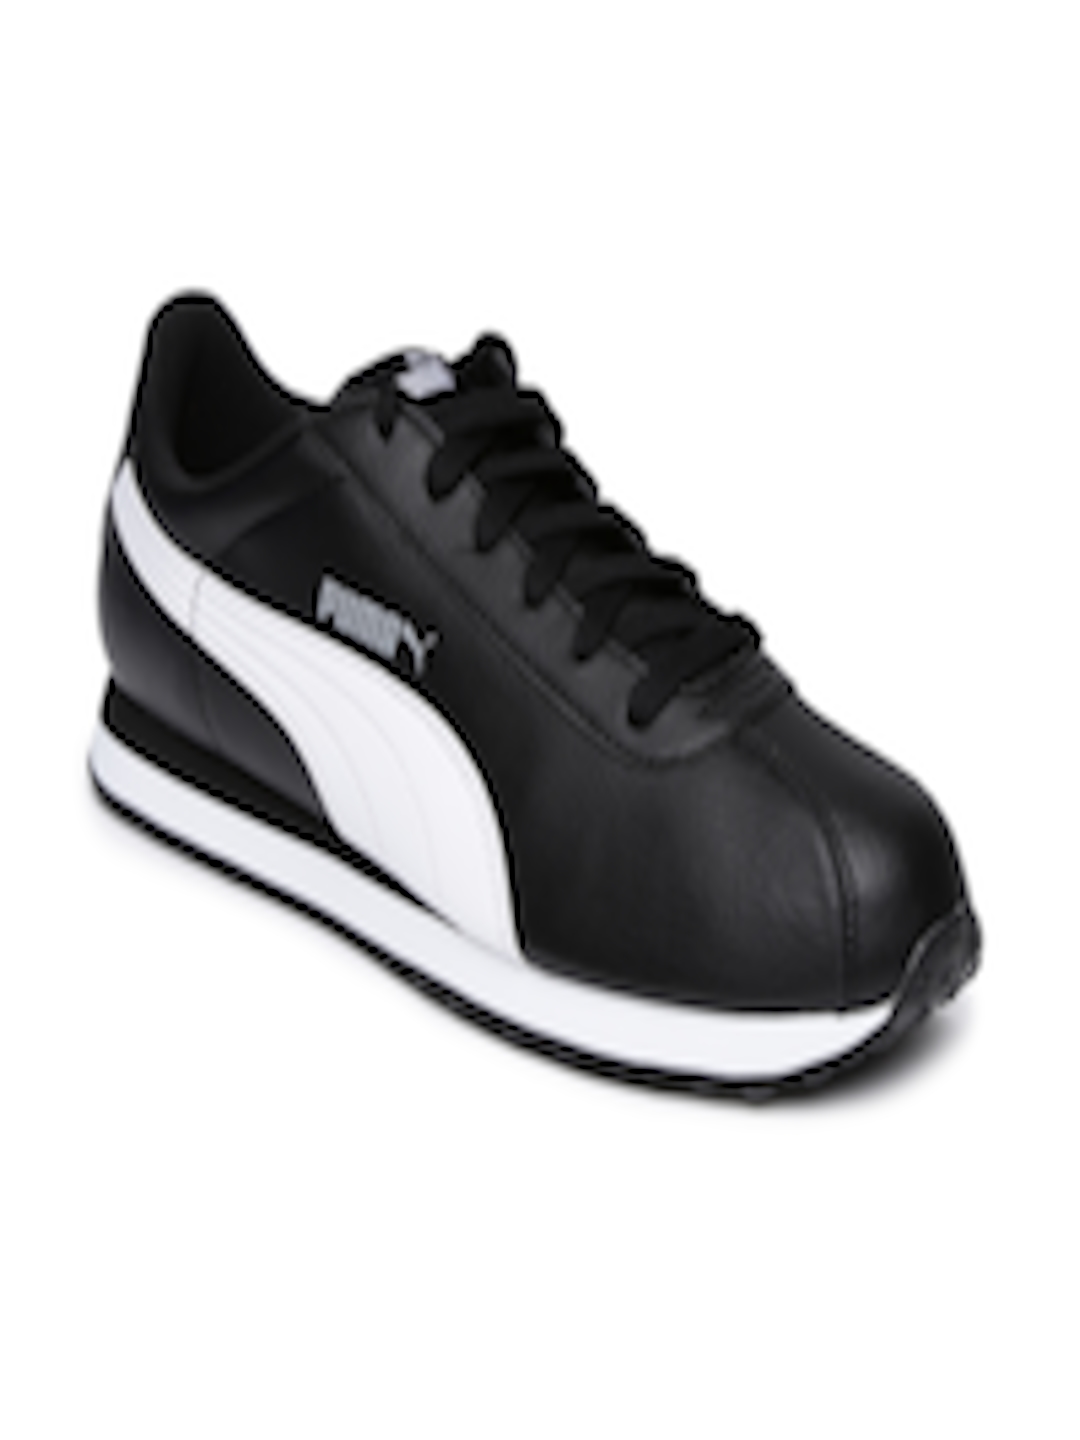 Buy PUMA Unisex Black Turin Sneakers - Casual Shoes for Unisex 1977404 ...